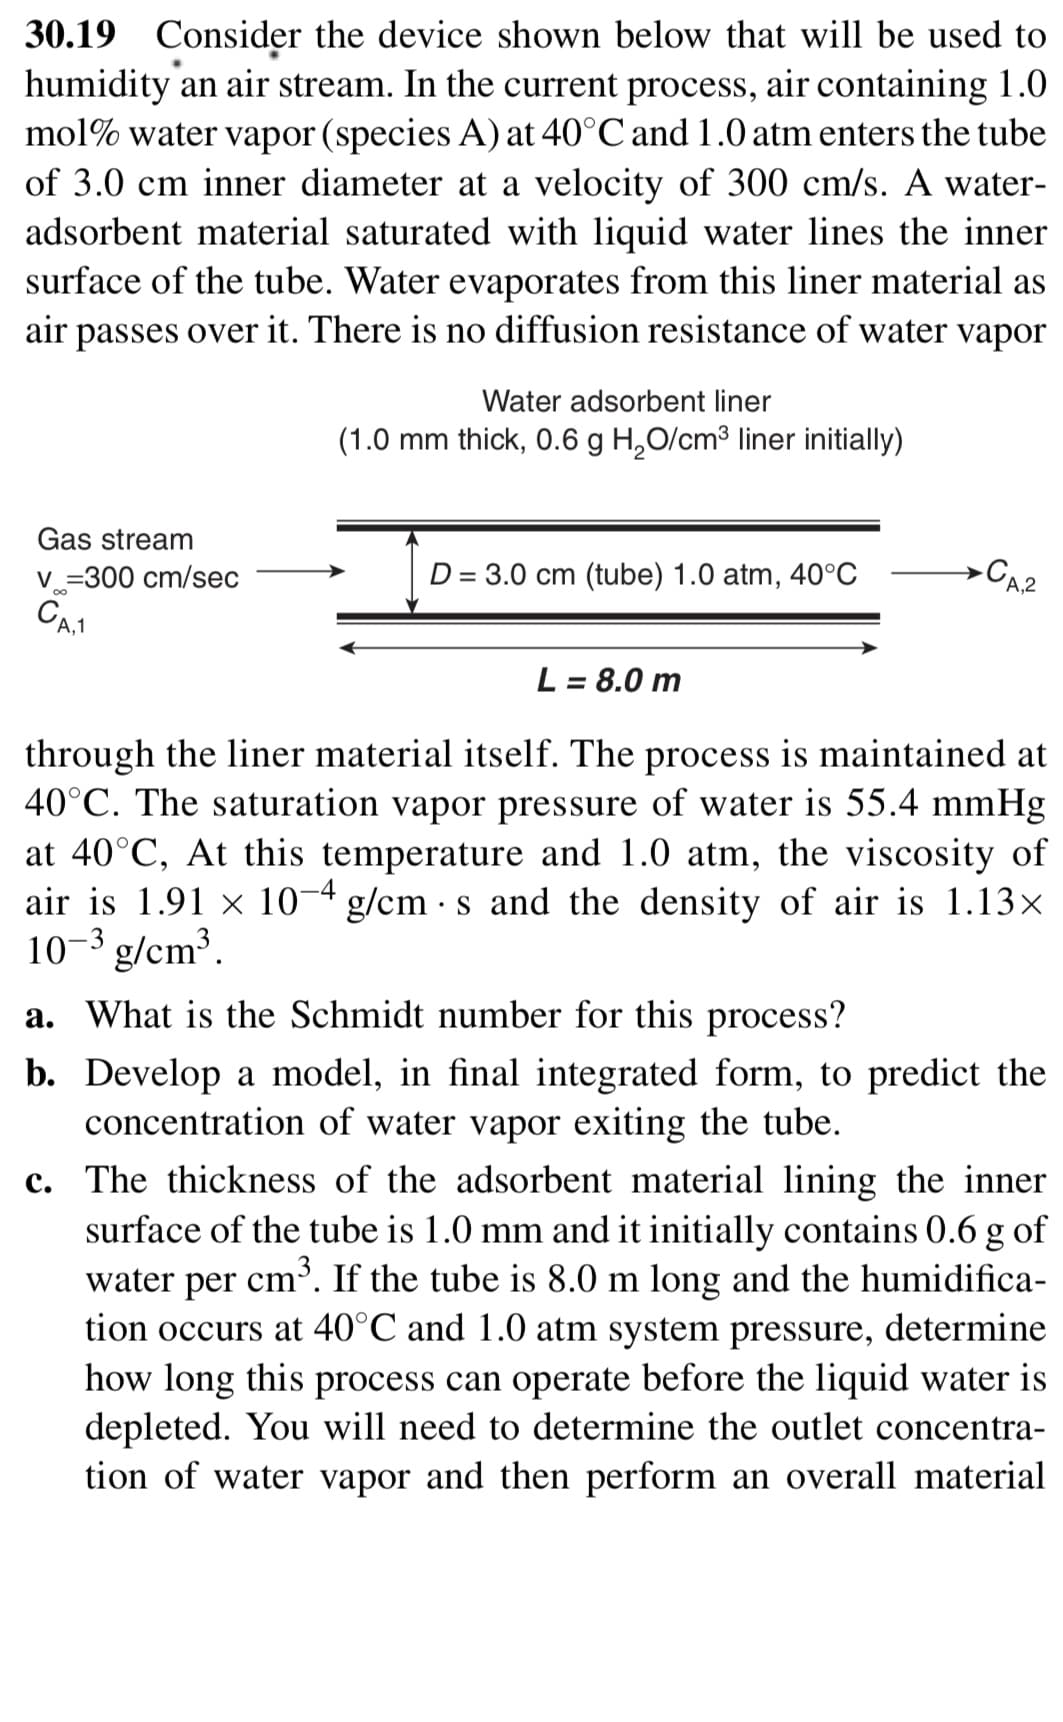 30.19 Consider the device shown below that will be used to
humidity an air stream. In the current process, air containing 1.0
mol% water vapor (species A) at 40°C and 1.0 atm enters the tube
of 3.0 cm inner diameter at a velocity of 300 cm/s. A water-
adsorbent material saturated with liquid water lines the inner
surface of the tube. Water evaporates from this liner material as
over it. There is no diffusion resistance of water vapor
air
passes
Water adsorbent liner
(1.0 mm thick, 0.6 g H,O/cm³ liner initially)
Gas stream
V =300 cm/sec
D = 3.0 cm (tube) 1.0 atm, 40°C
CA2
L = 8.0 m
%3D
through the liner material itself. The process is maintained at
40°C. The saturation vapor pressure of water is 55.4 mmHg
at 40°C, At this temperature and 1.0 atm, the viscosity of
air is 1.91 x 10¬4 g/cm · s and the density of air is 1.13x
10-3 g/cm³.
a. What is the Schmidt number for this process?
b. Develop a model, in final integrated form, to predict the
concentration of water vapor exiting the tube.
c. The thickness of the adsorbent material lining the inner
surface of the tube is 1.0 mm and it initially contains 0.6 g of
cm³. If the tube is 8.0 m long and the humidifica-
tion occurs at 40°C and 1.0 atm system pressure, determine
how long this process can operate before the liquid water is
depleted. You will need to determine the outlet concentra-
tion of water vapor and then perform an overall material
water
per
